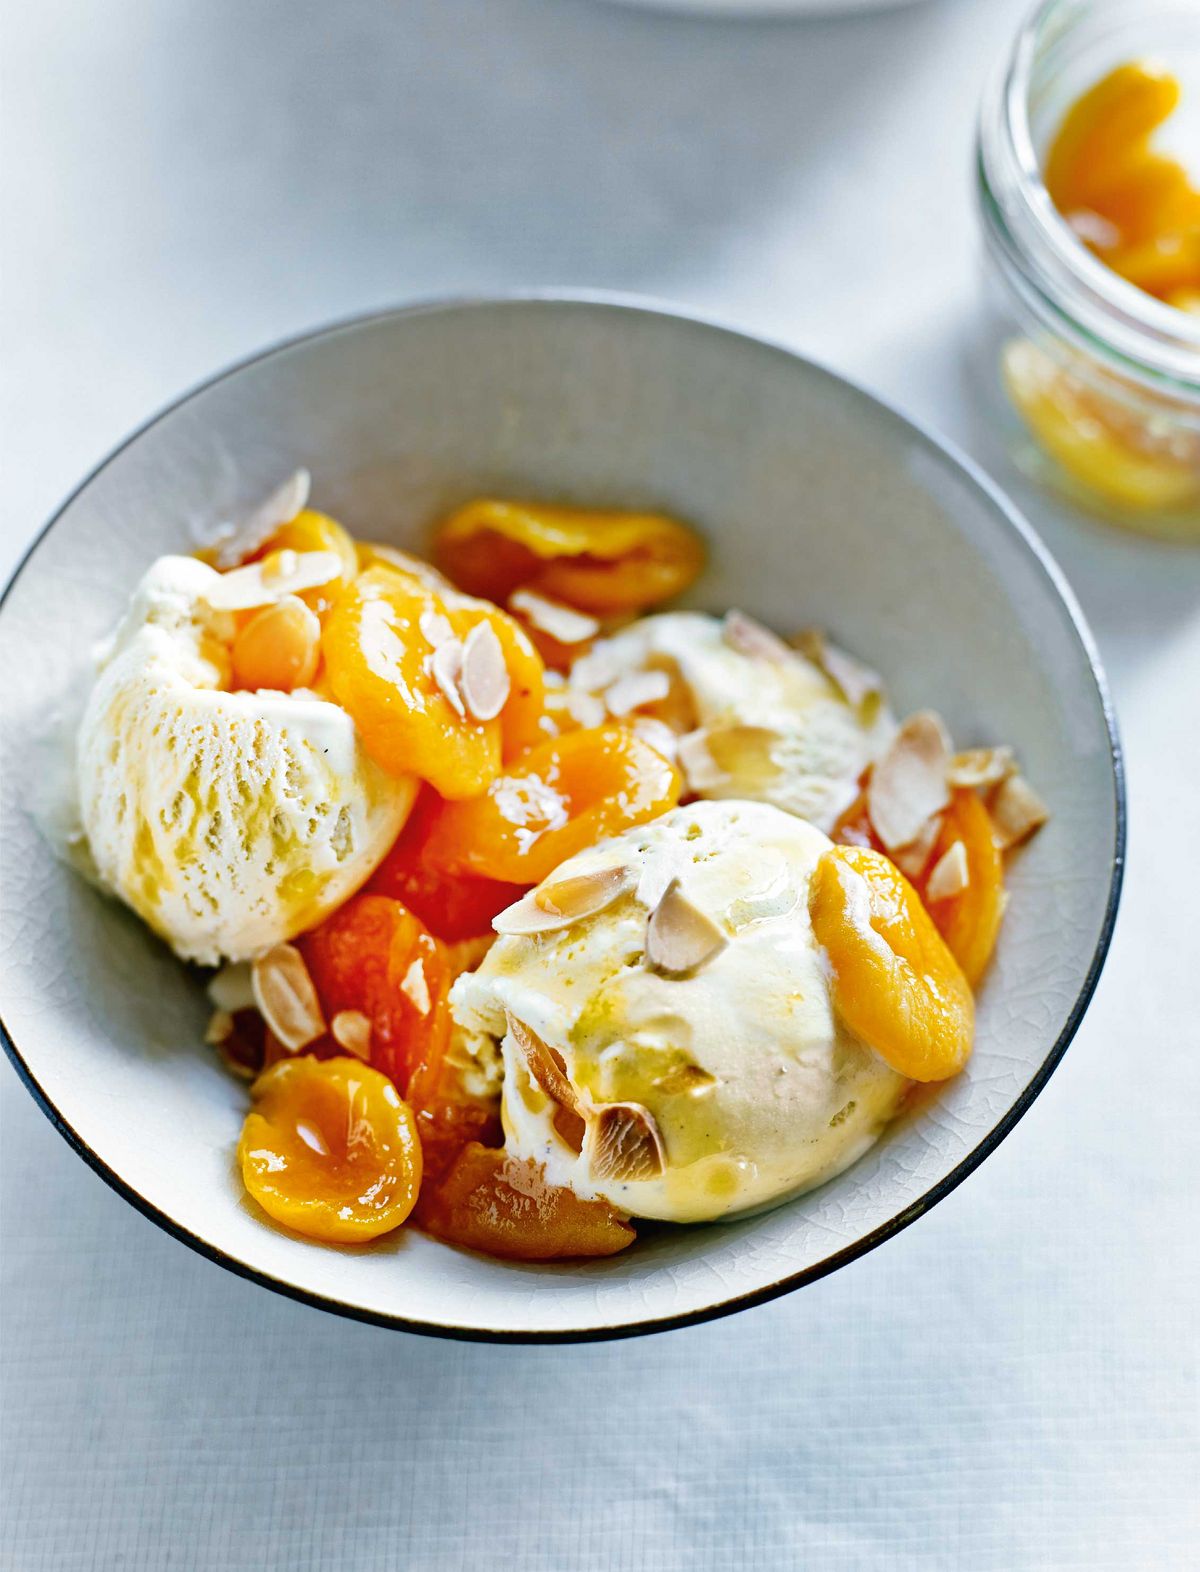 Macerated Apricots with Amaretto and Toasted Almonds